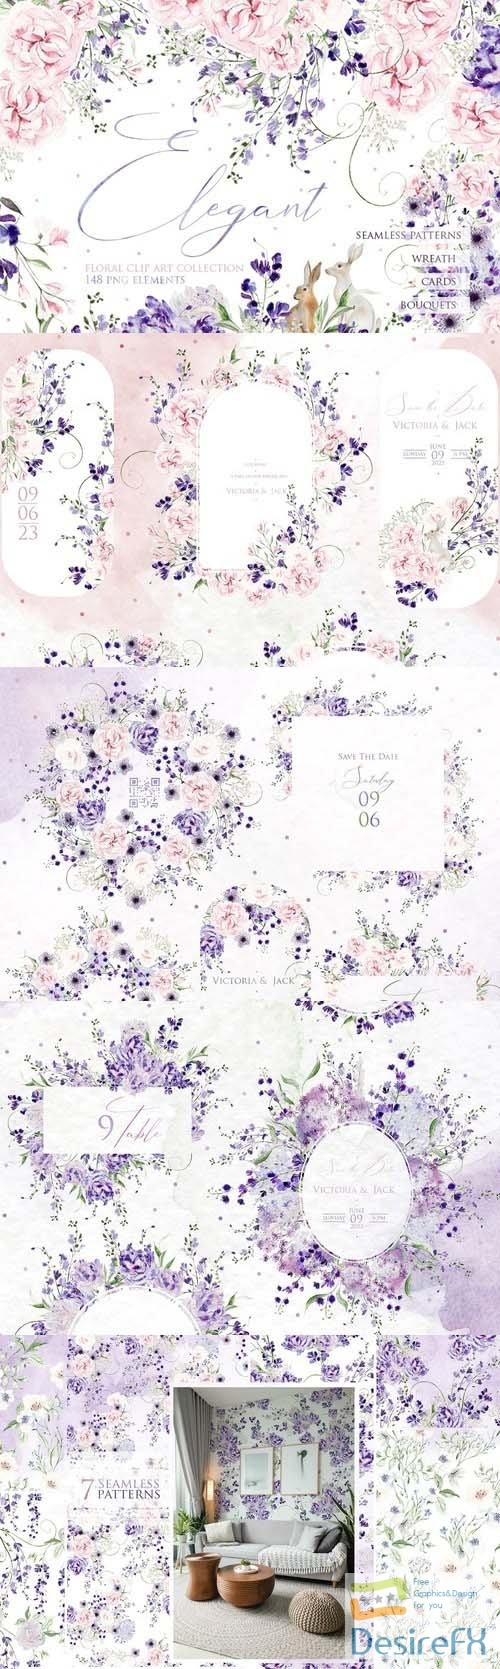 Beautiful Wedding Collection, Design Elements for Invitations